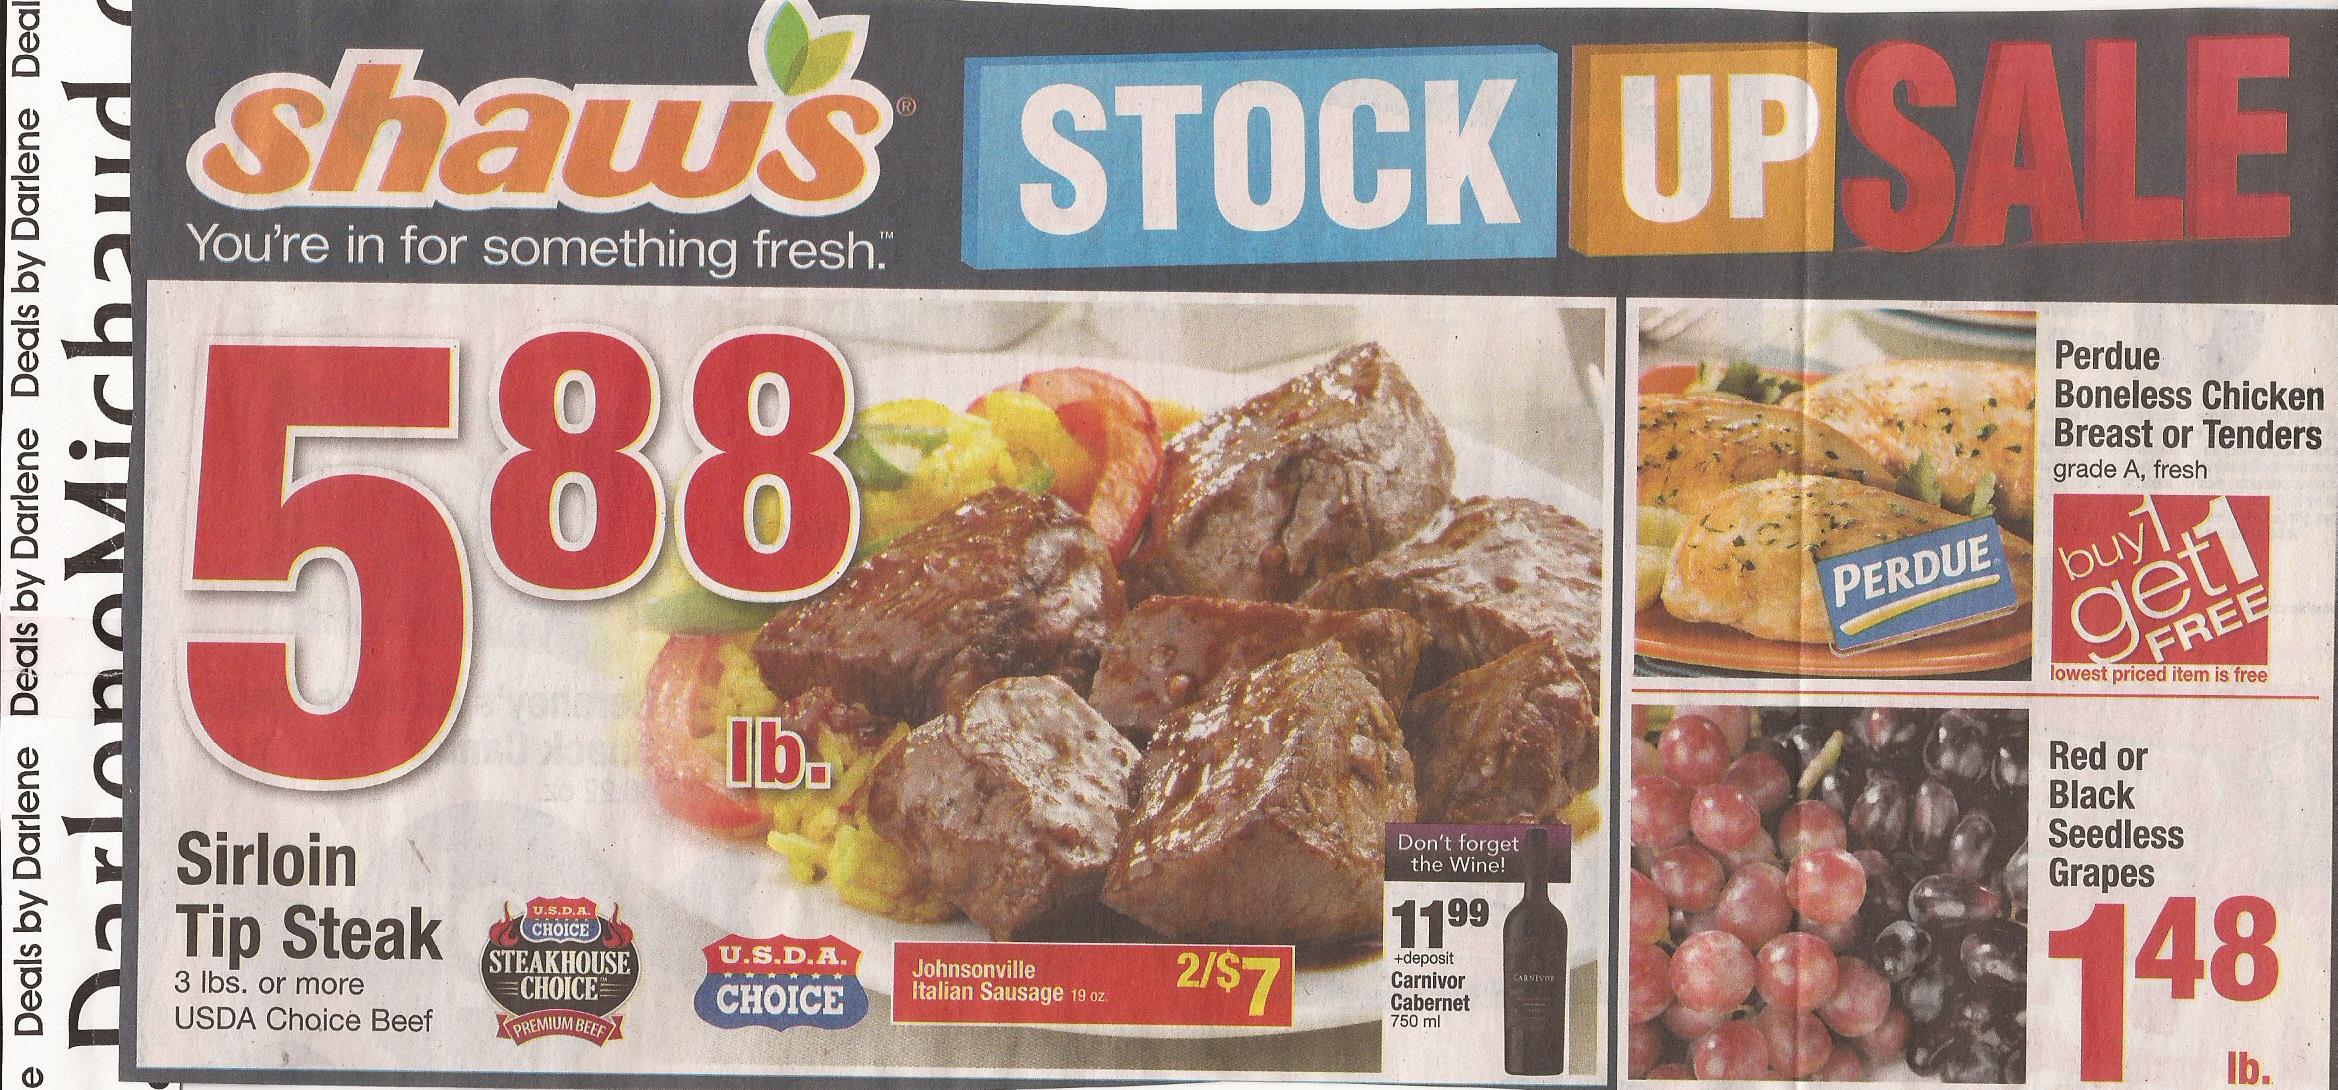 shaws-flyer-oct-9-oct-15-page-1a